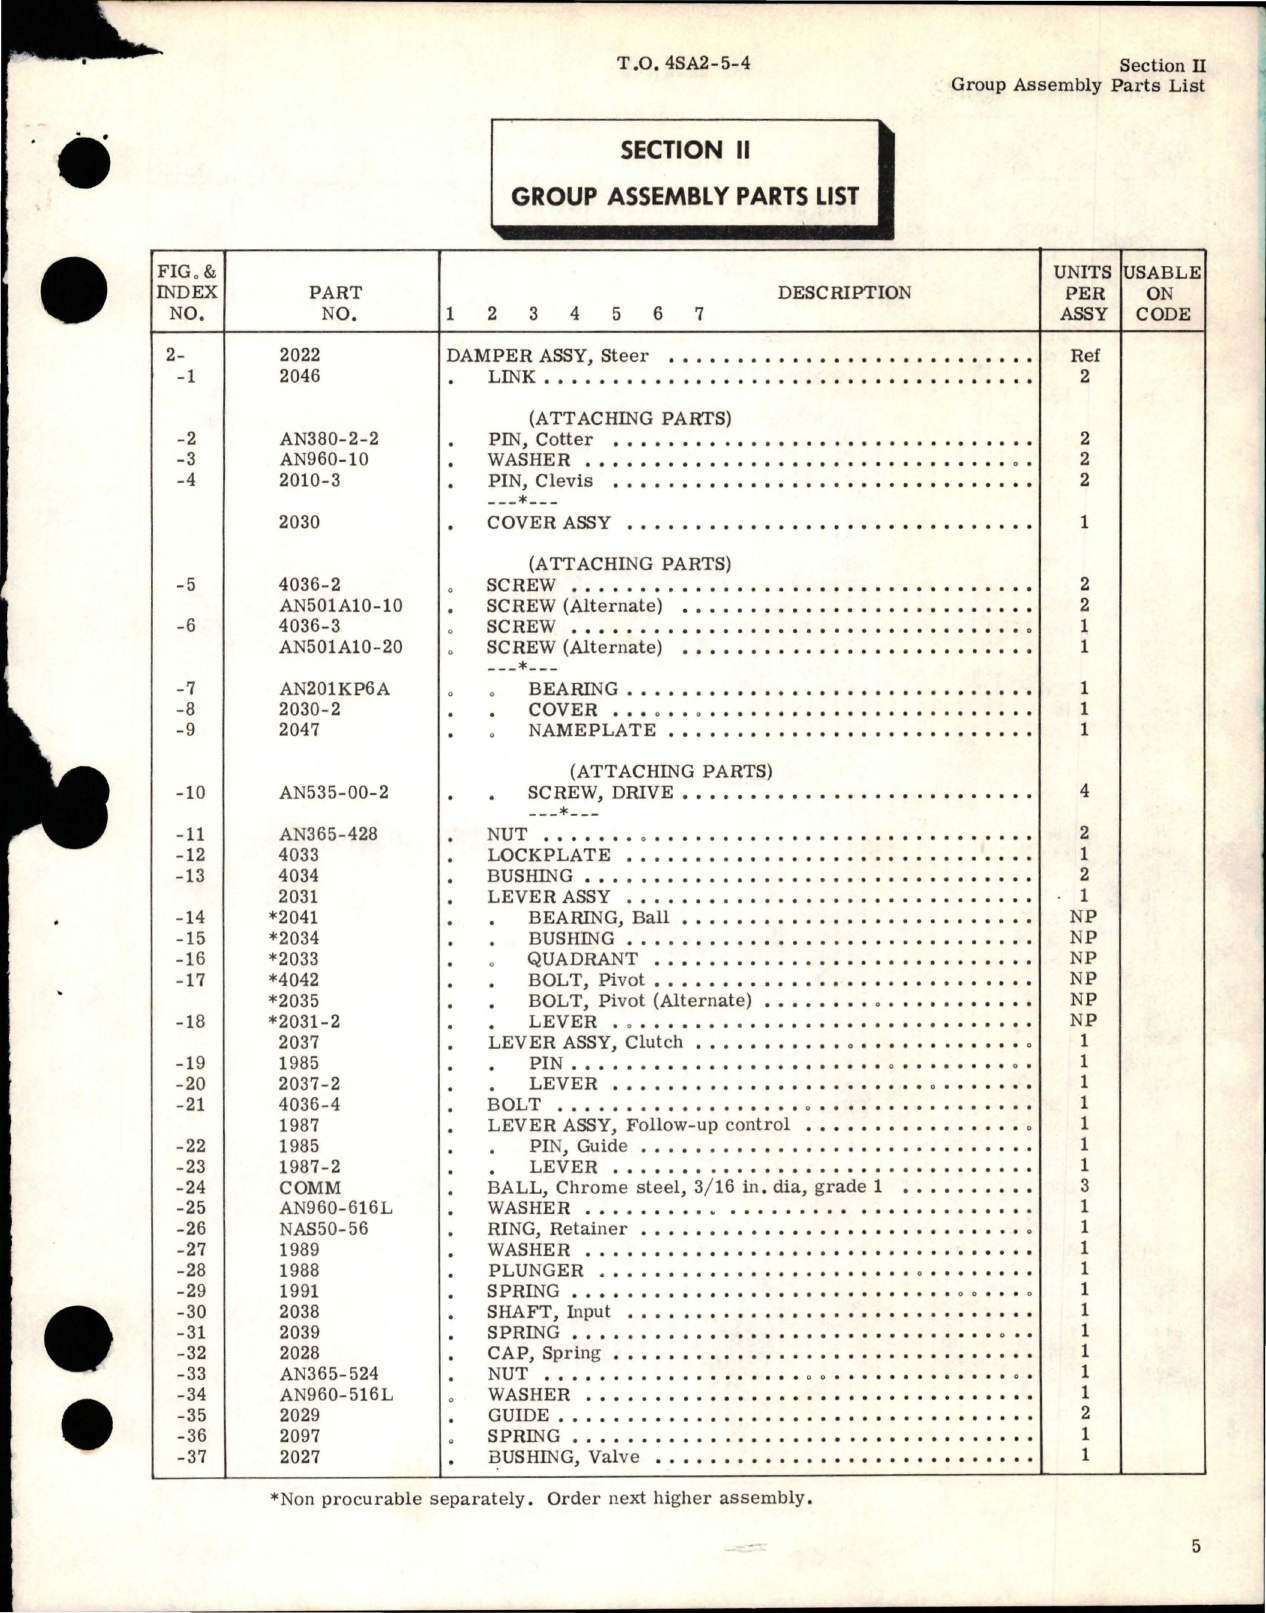 Sample page 7 from AirCorps Library document: Illustrated Parts Breakdown for Steer Damper - Parts 1951 and 2022